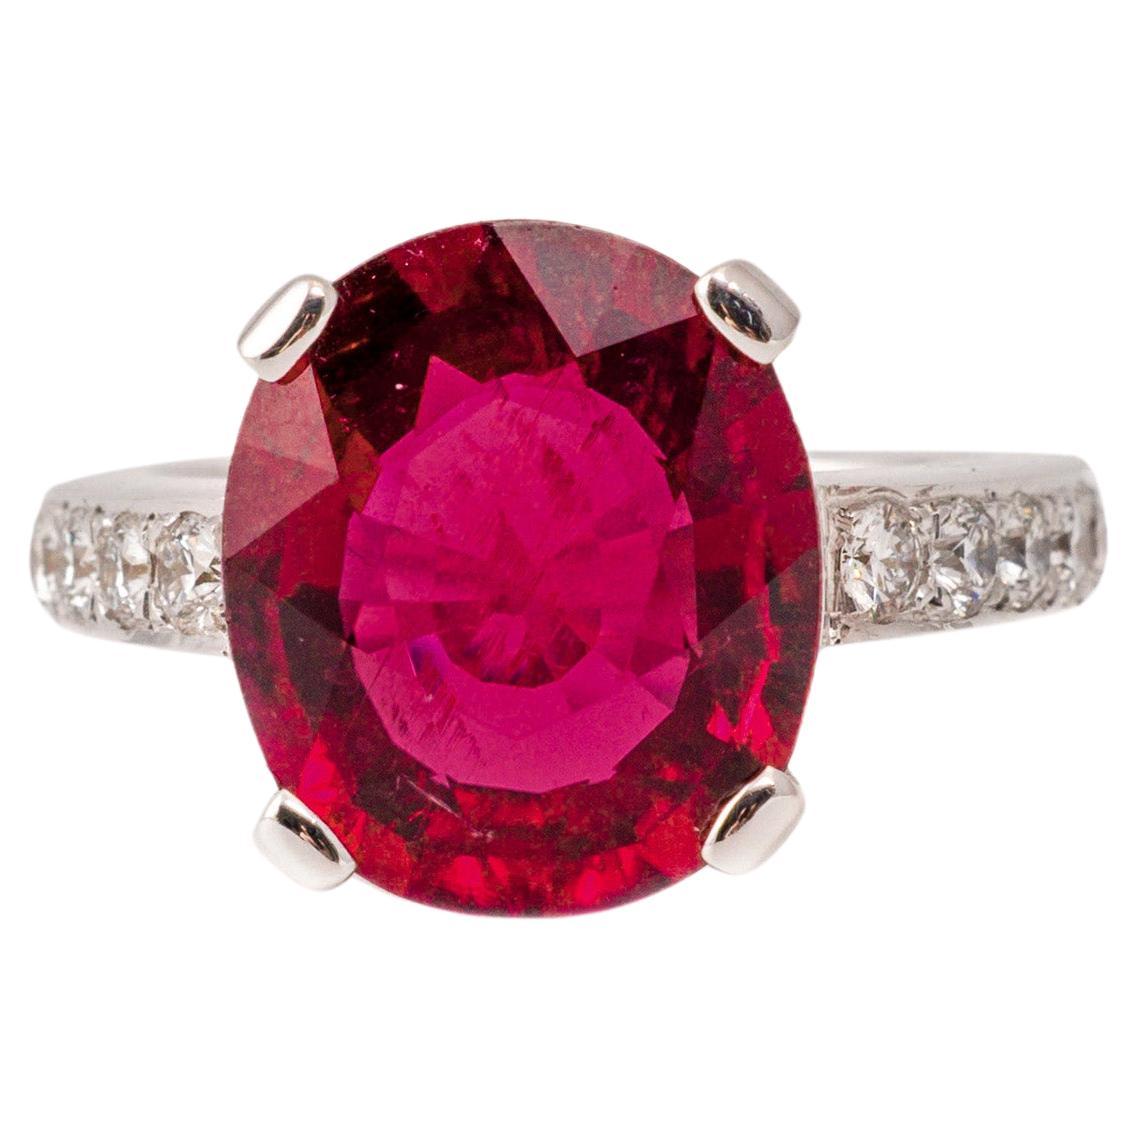 "Costis" Eagle Claw Ring with 7.46 Carats Rubellite and Diamonds For Sale